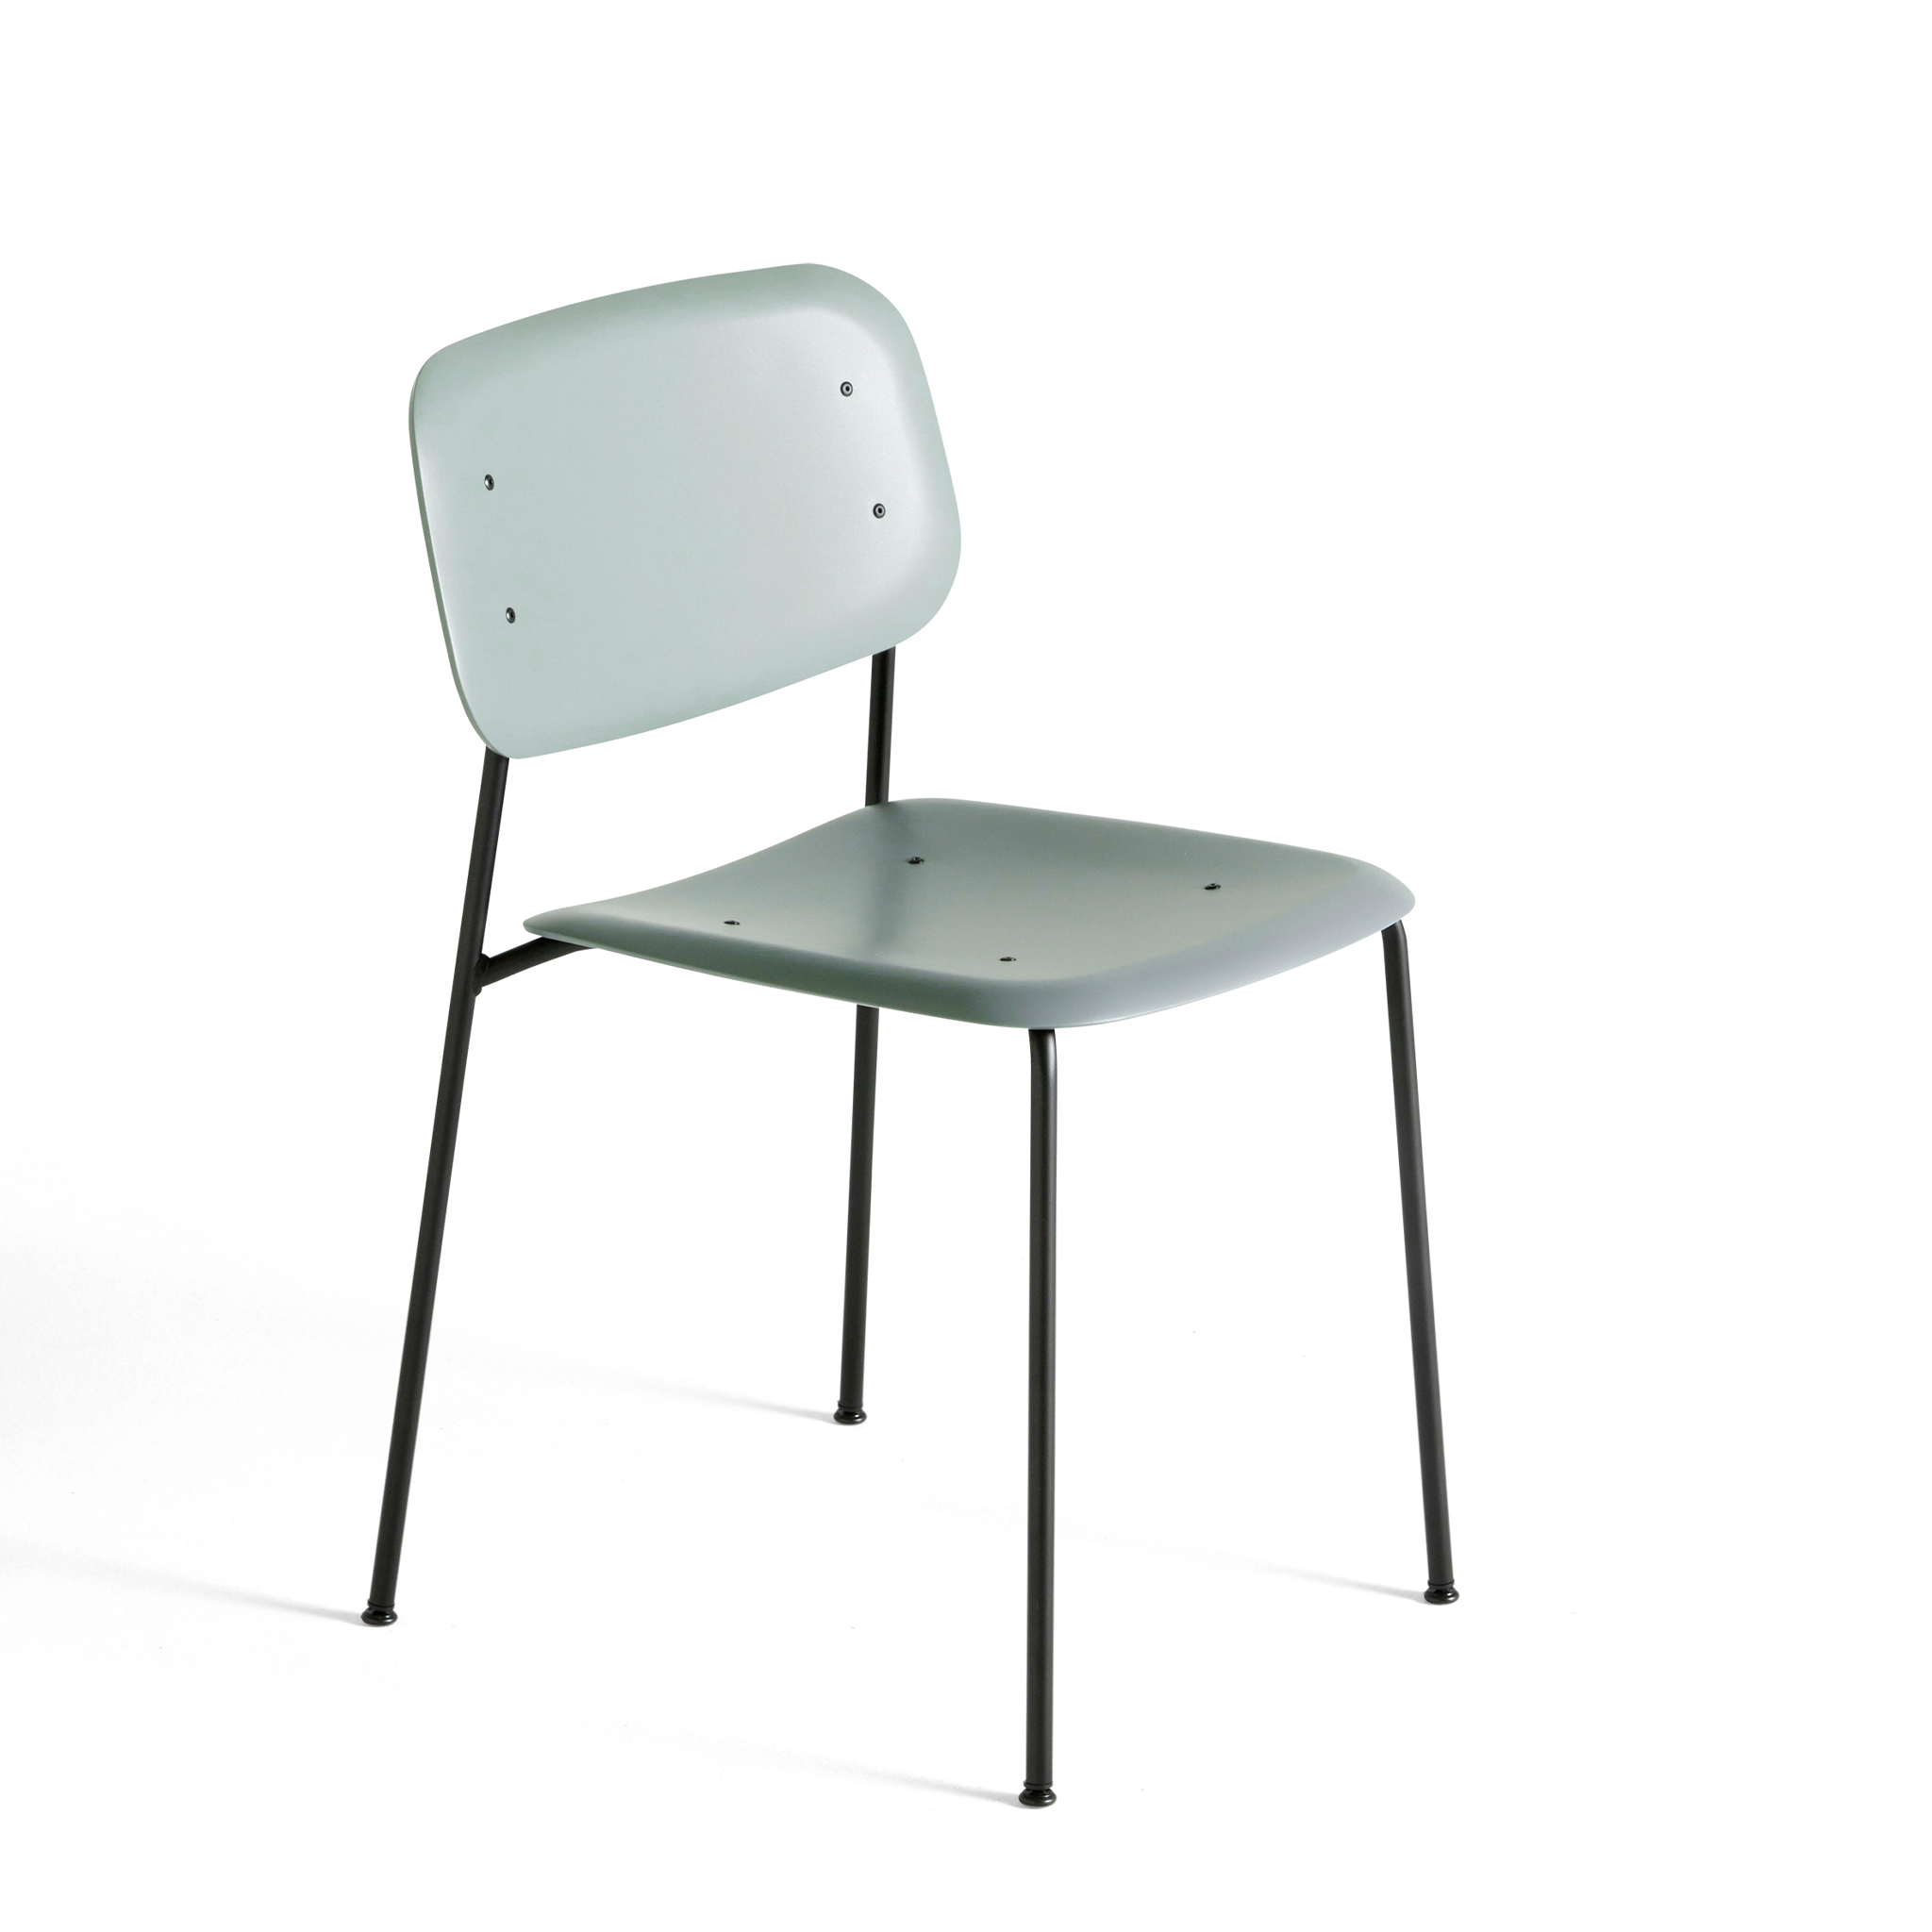 Soft Edge 45 Chair by Hay